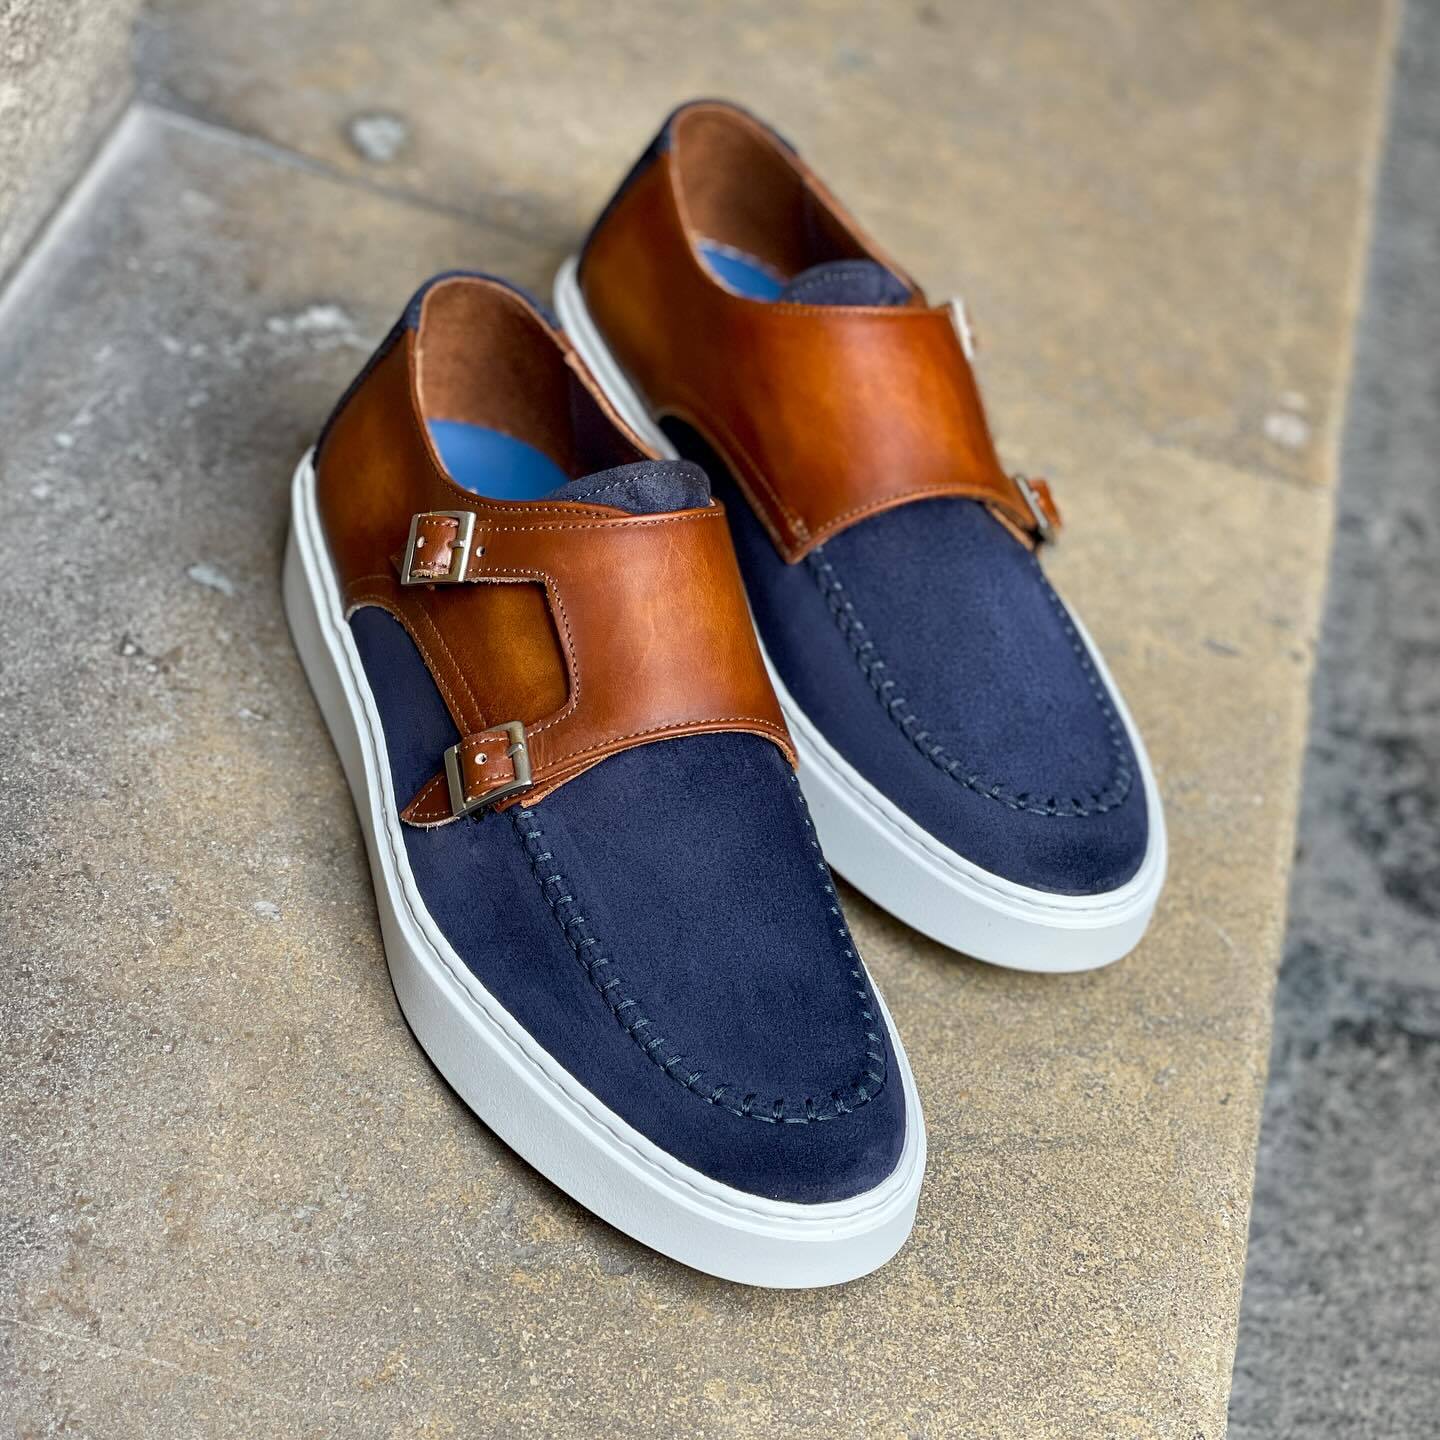 Blue double strap casual sneakers